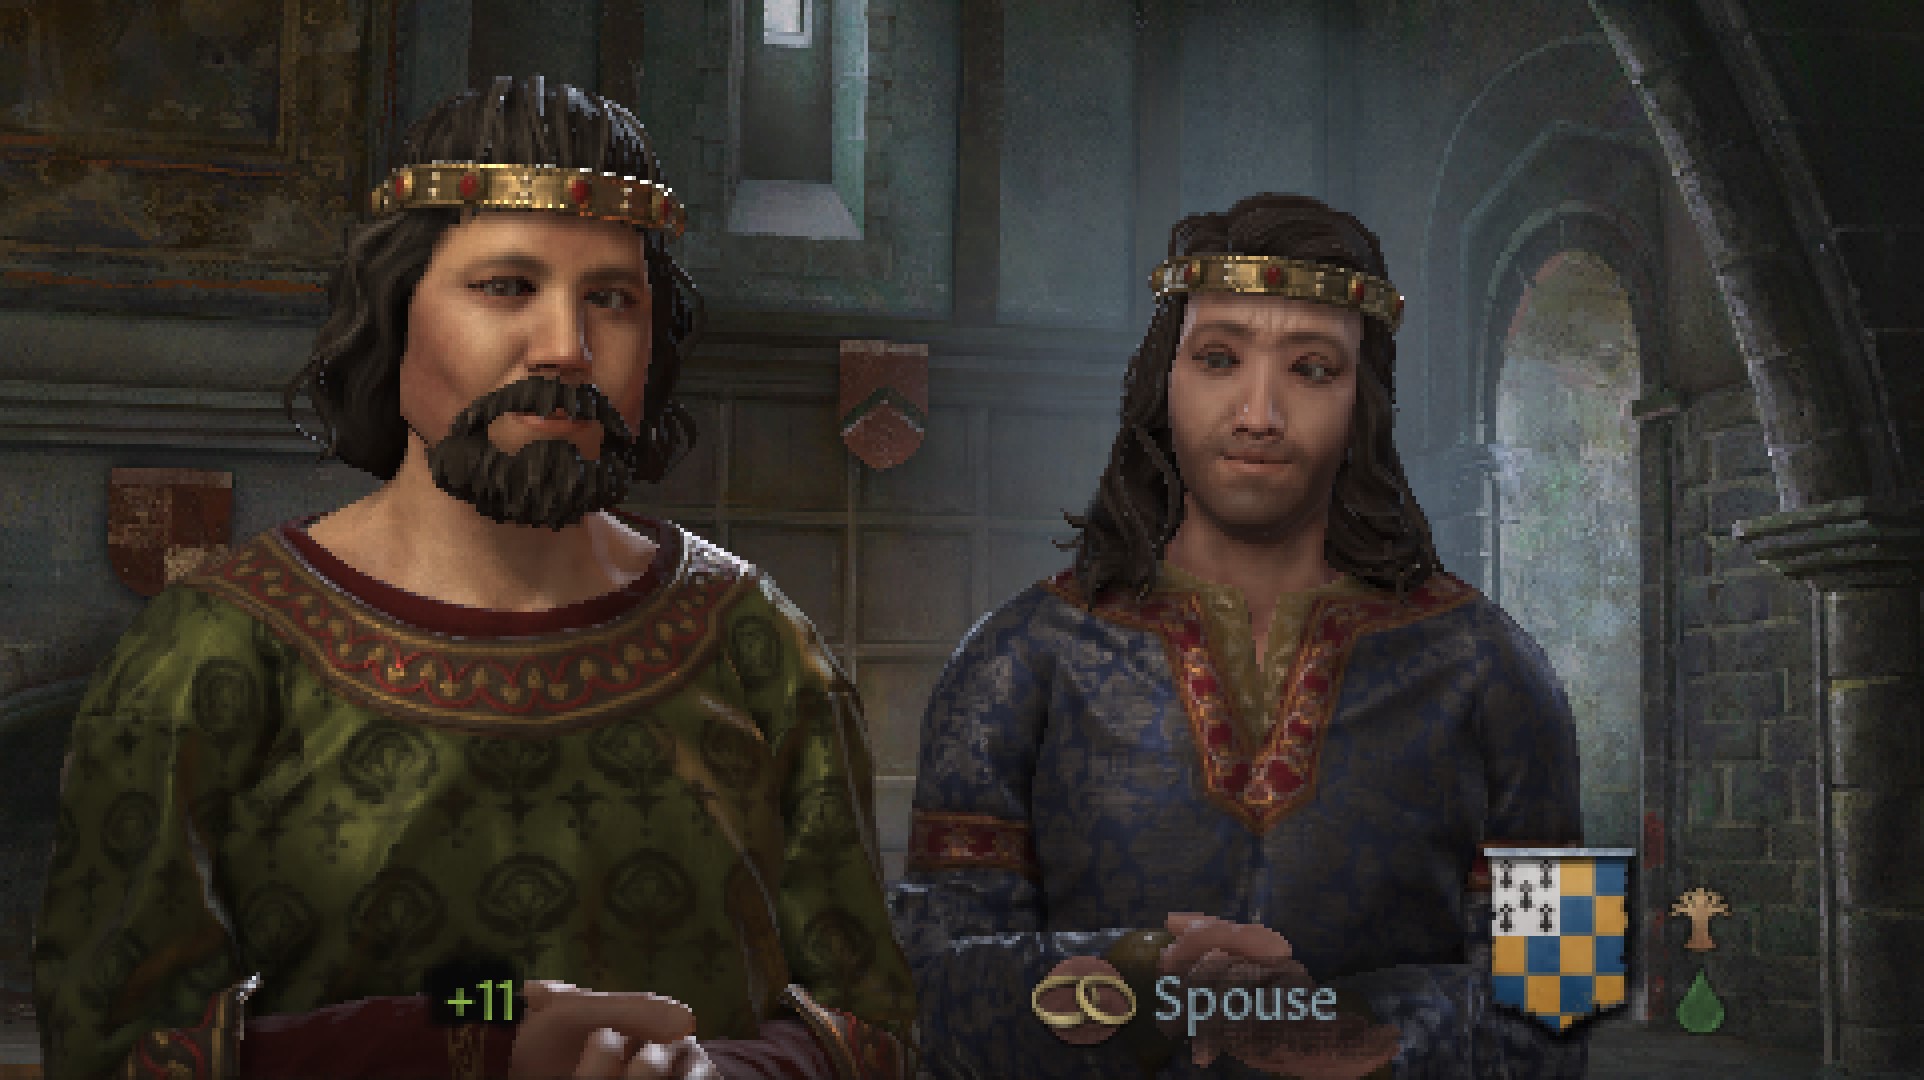 Crusader Kings 3's next update adds an option for same-sex marriages